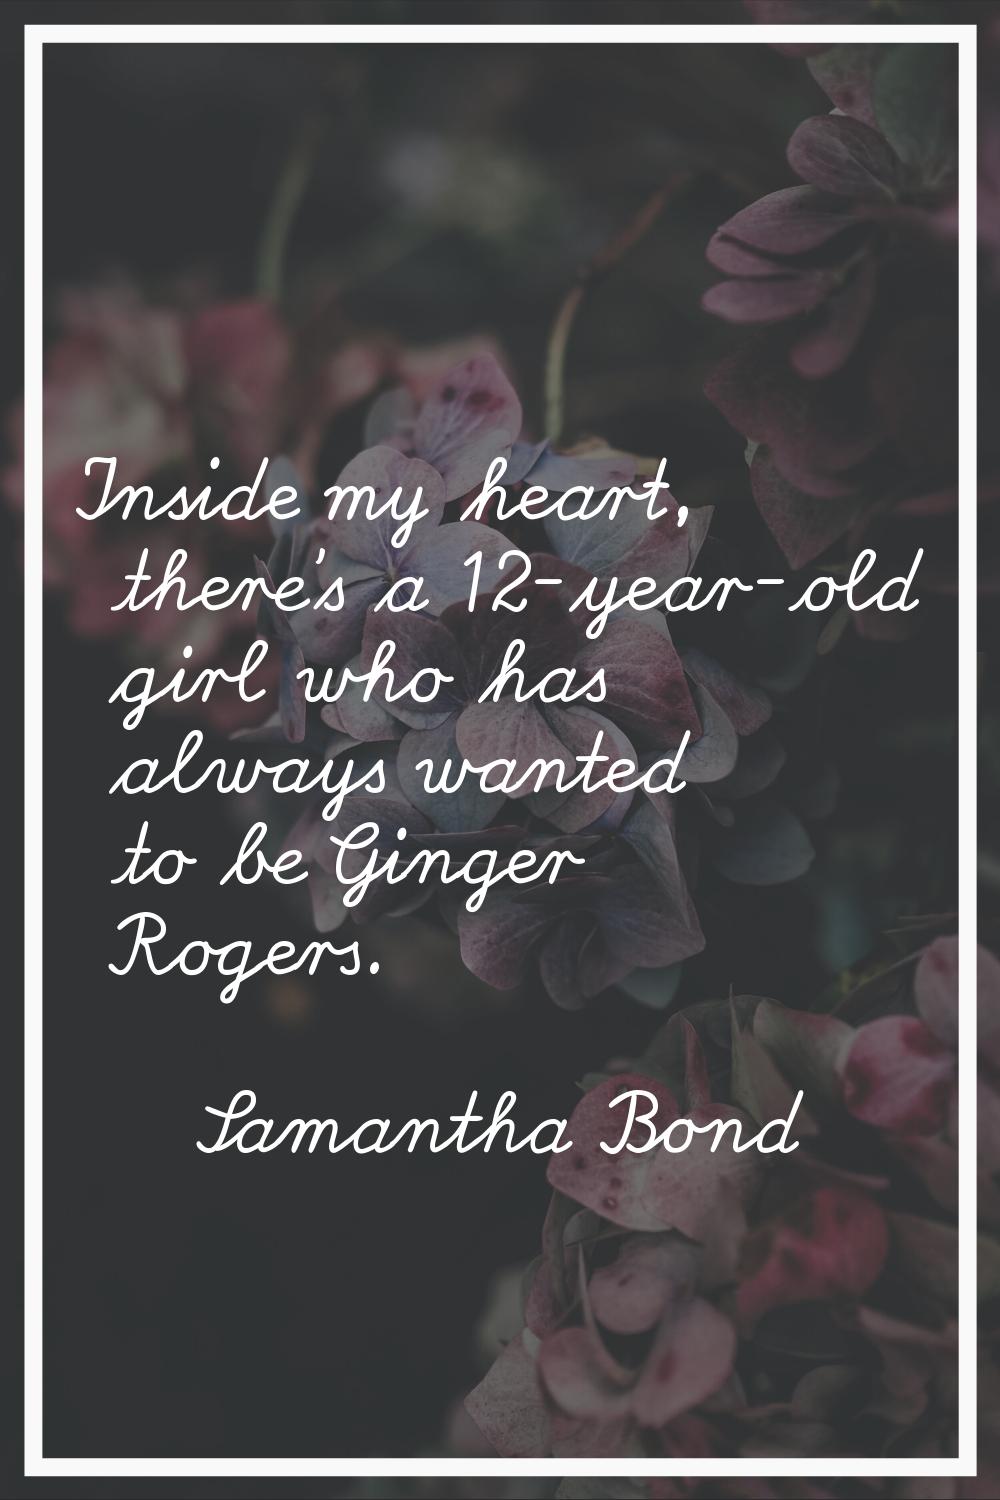 Inside my heart, there's a 12-year-old girl who has always wanted to be Ginger Rogers.